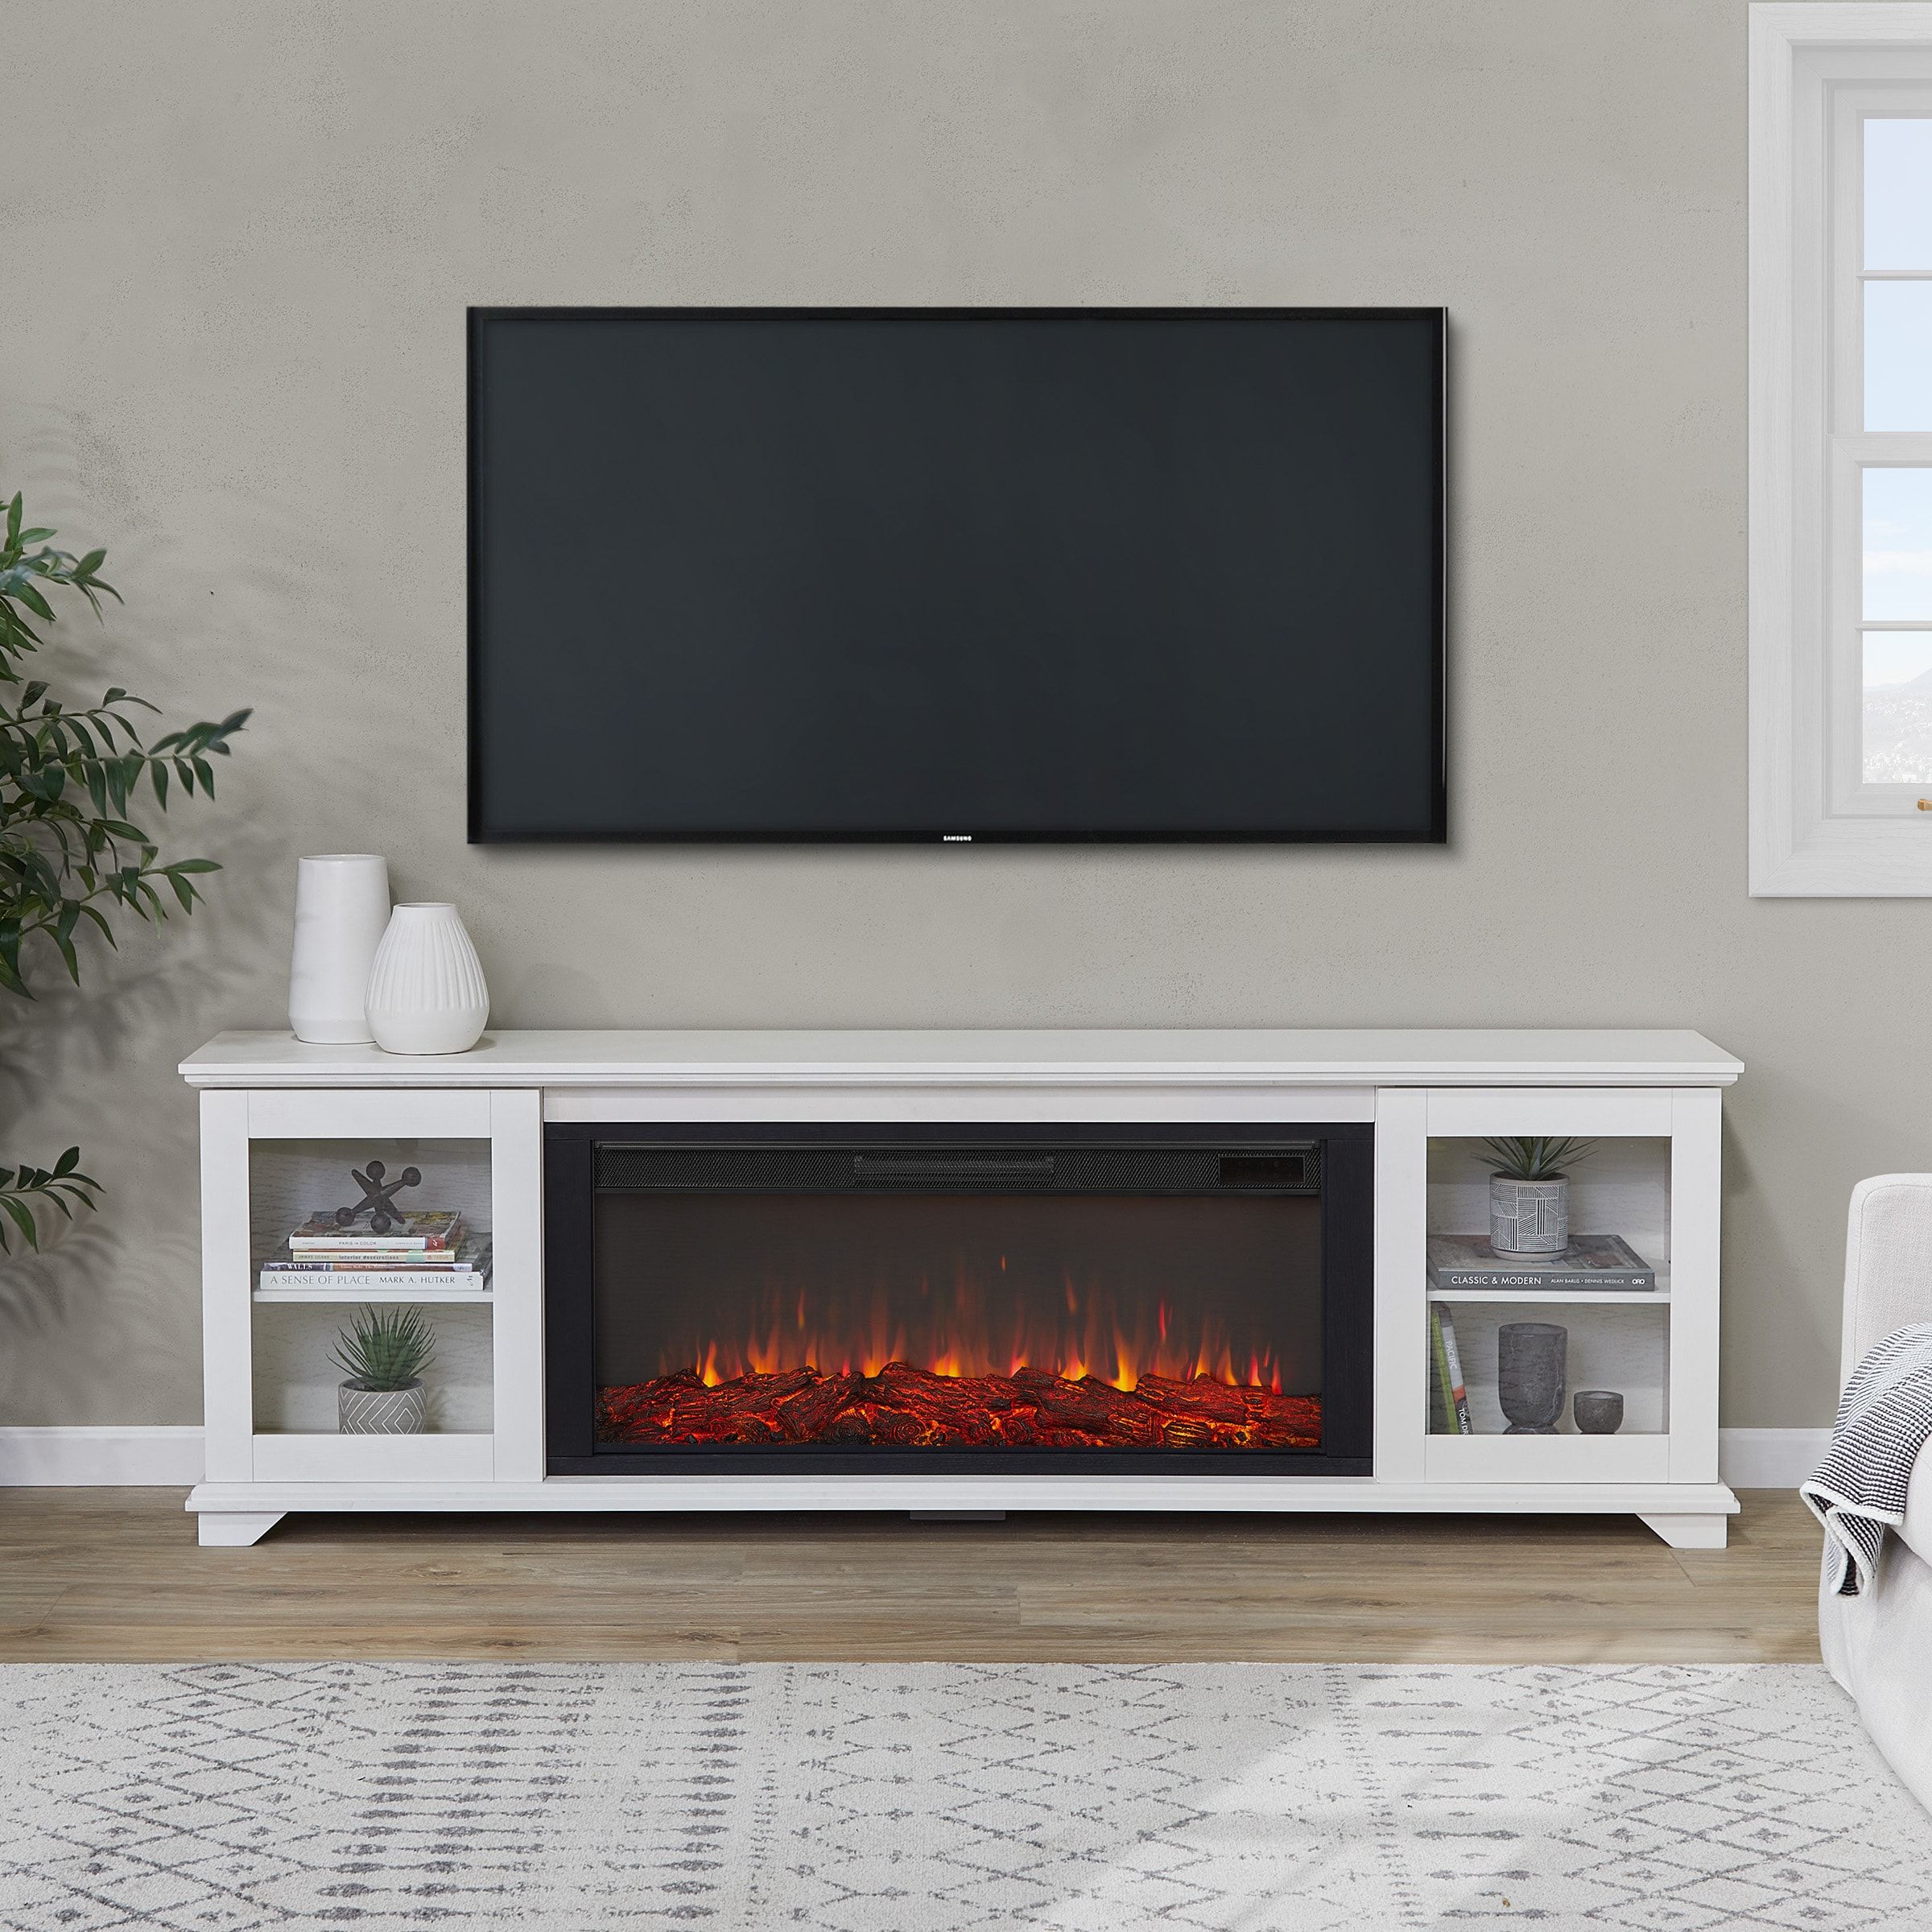 Real Flame 81 In W White Tv Stand With Fan Forced Electric Fireplace In The Electric  Fireplaces Department At Lowes Regarding Tv Stands With Electric Fireplace (View 4 of 15)